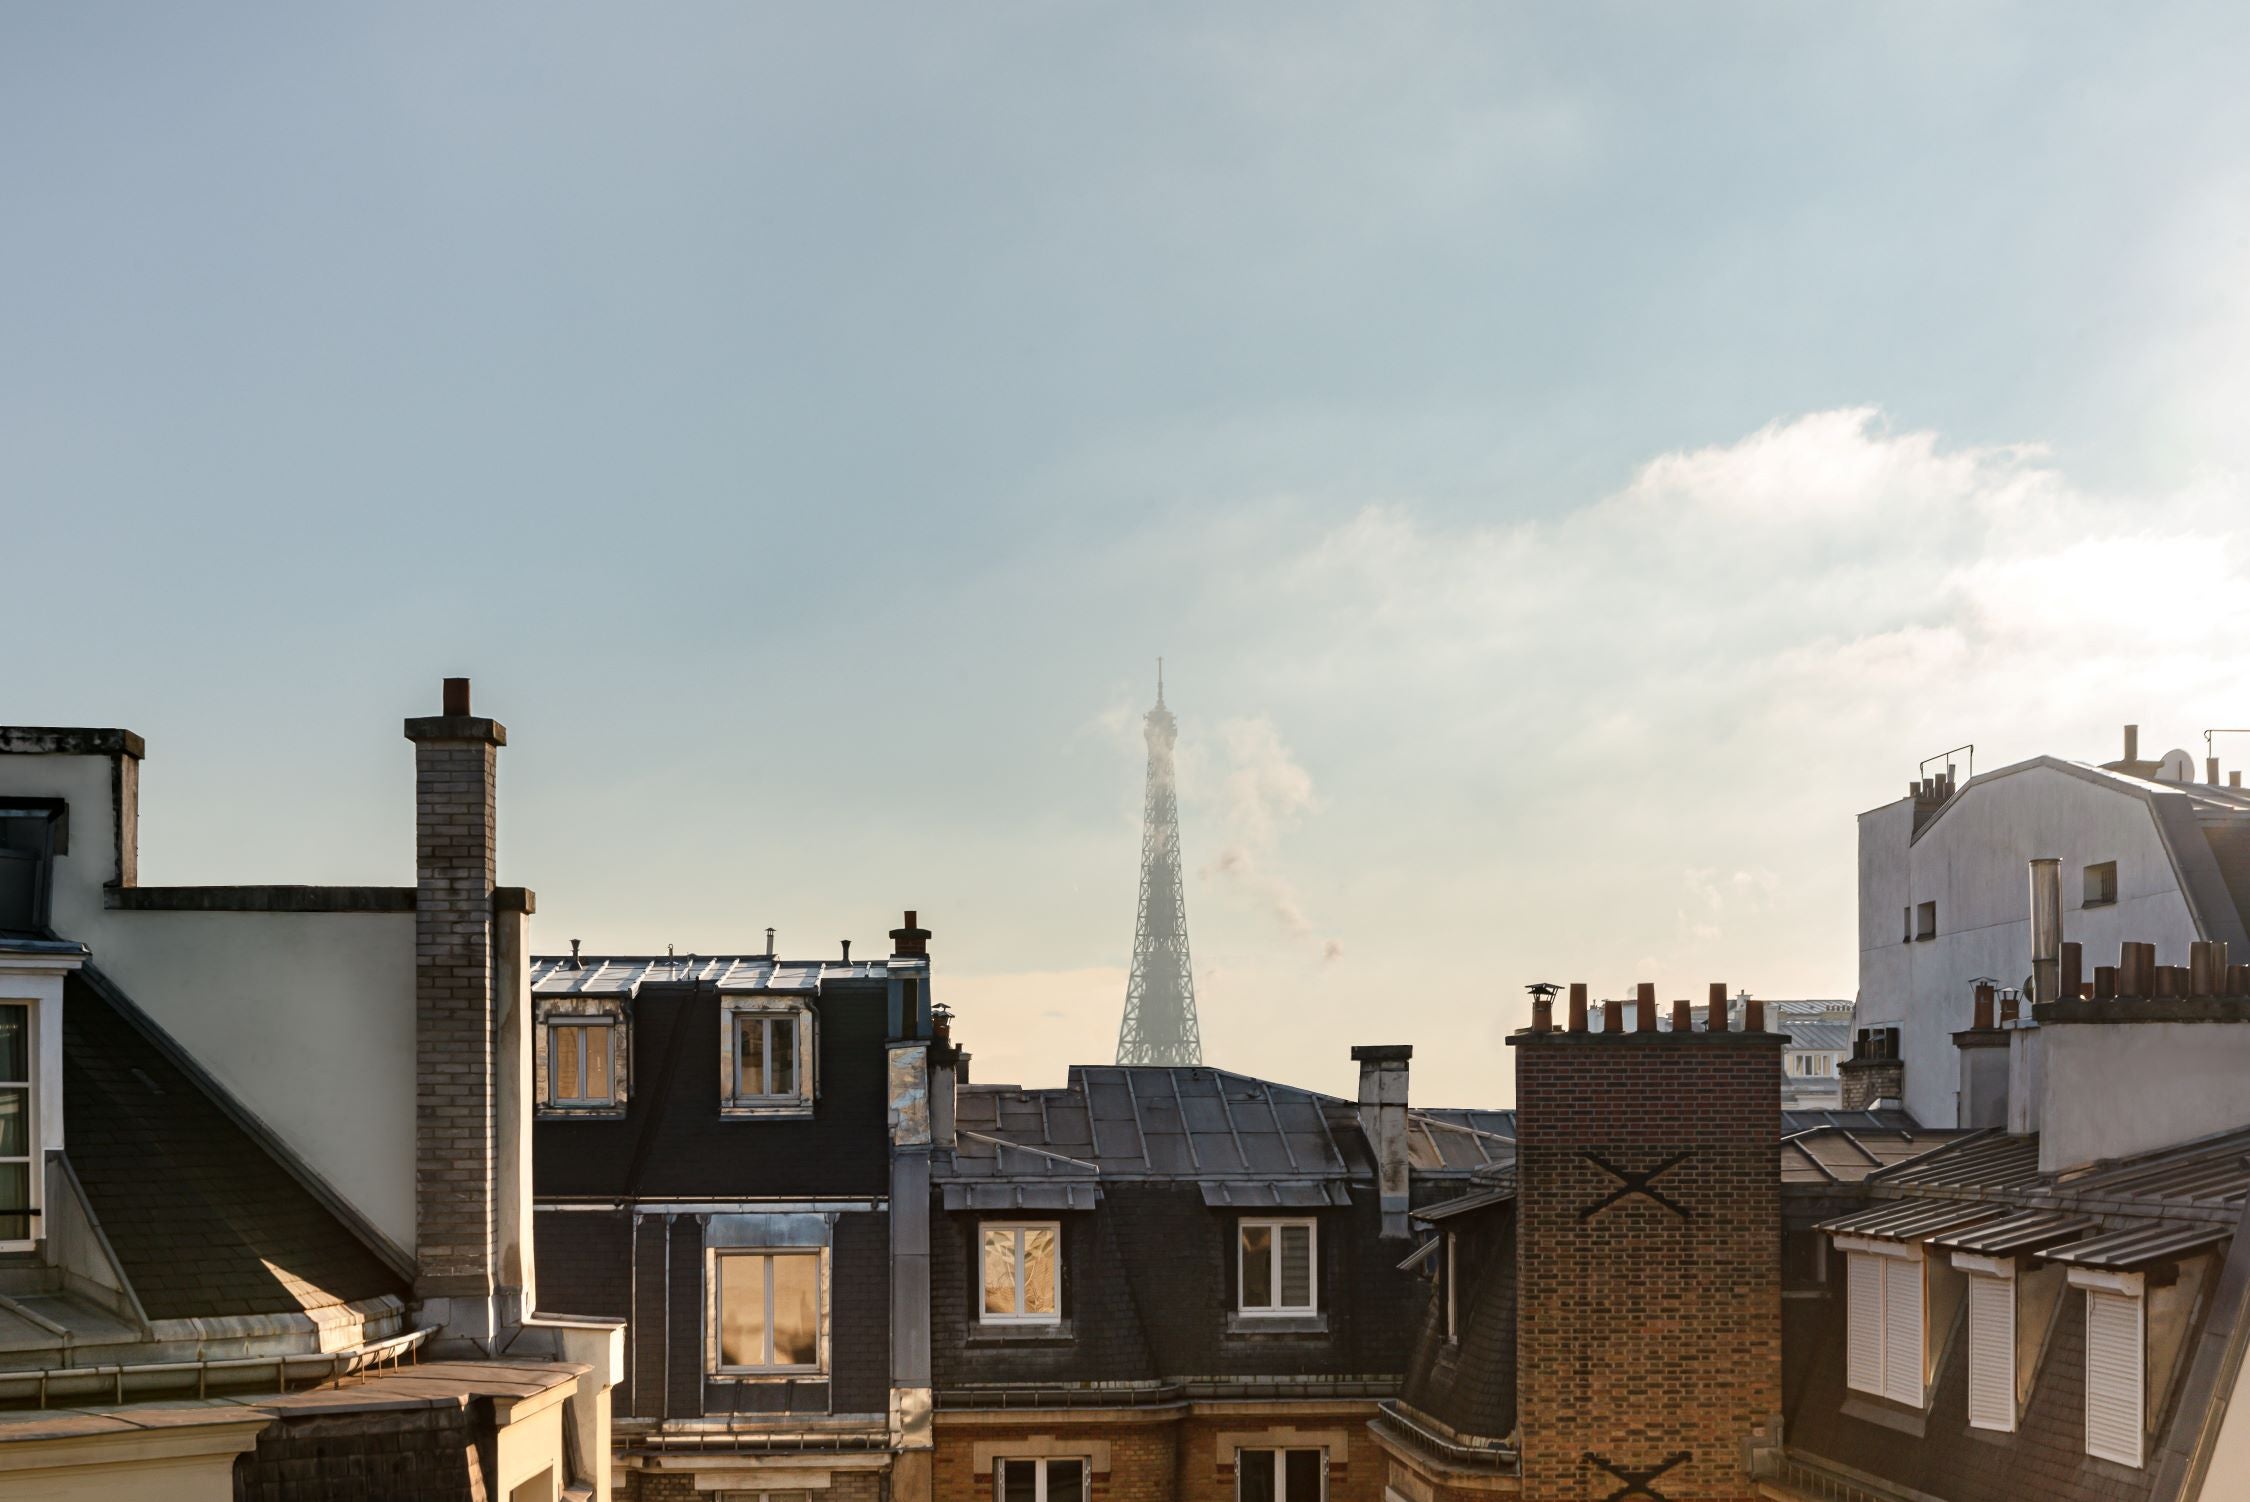 Image showing the Eiffel Tower in Paris, taken from Le Royal Monceau hotel